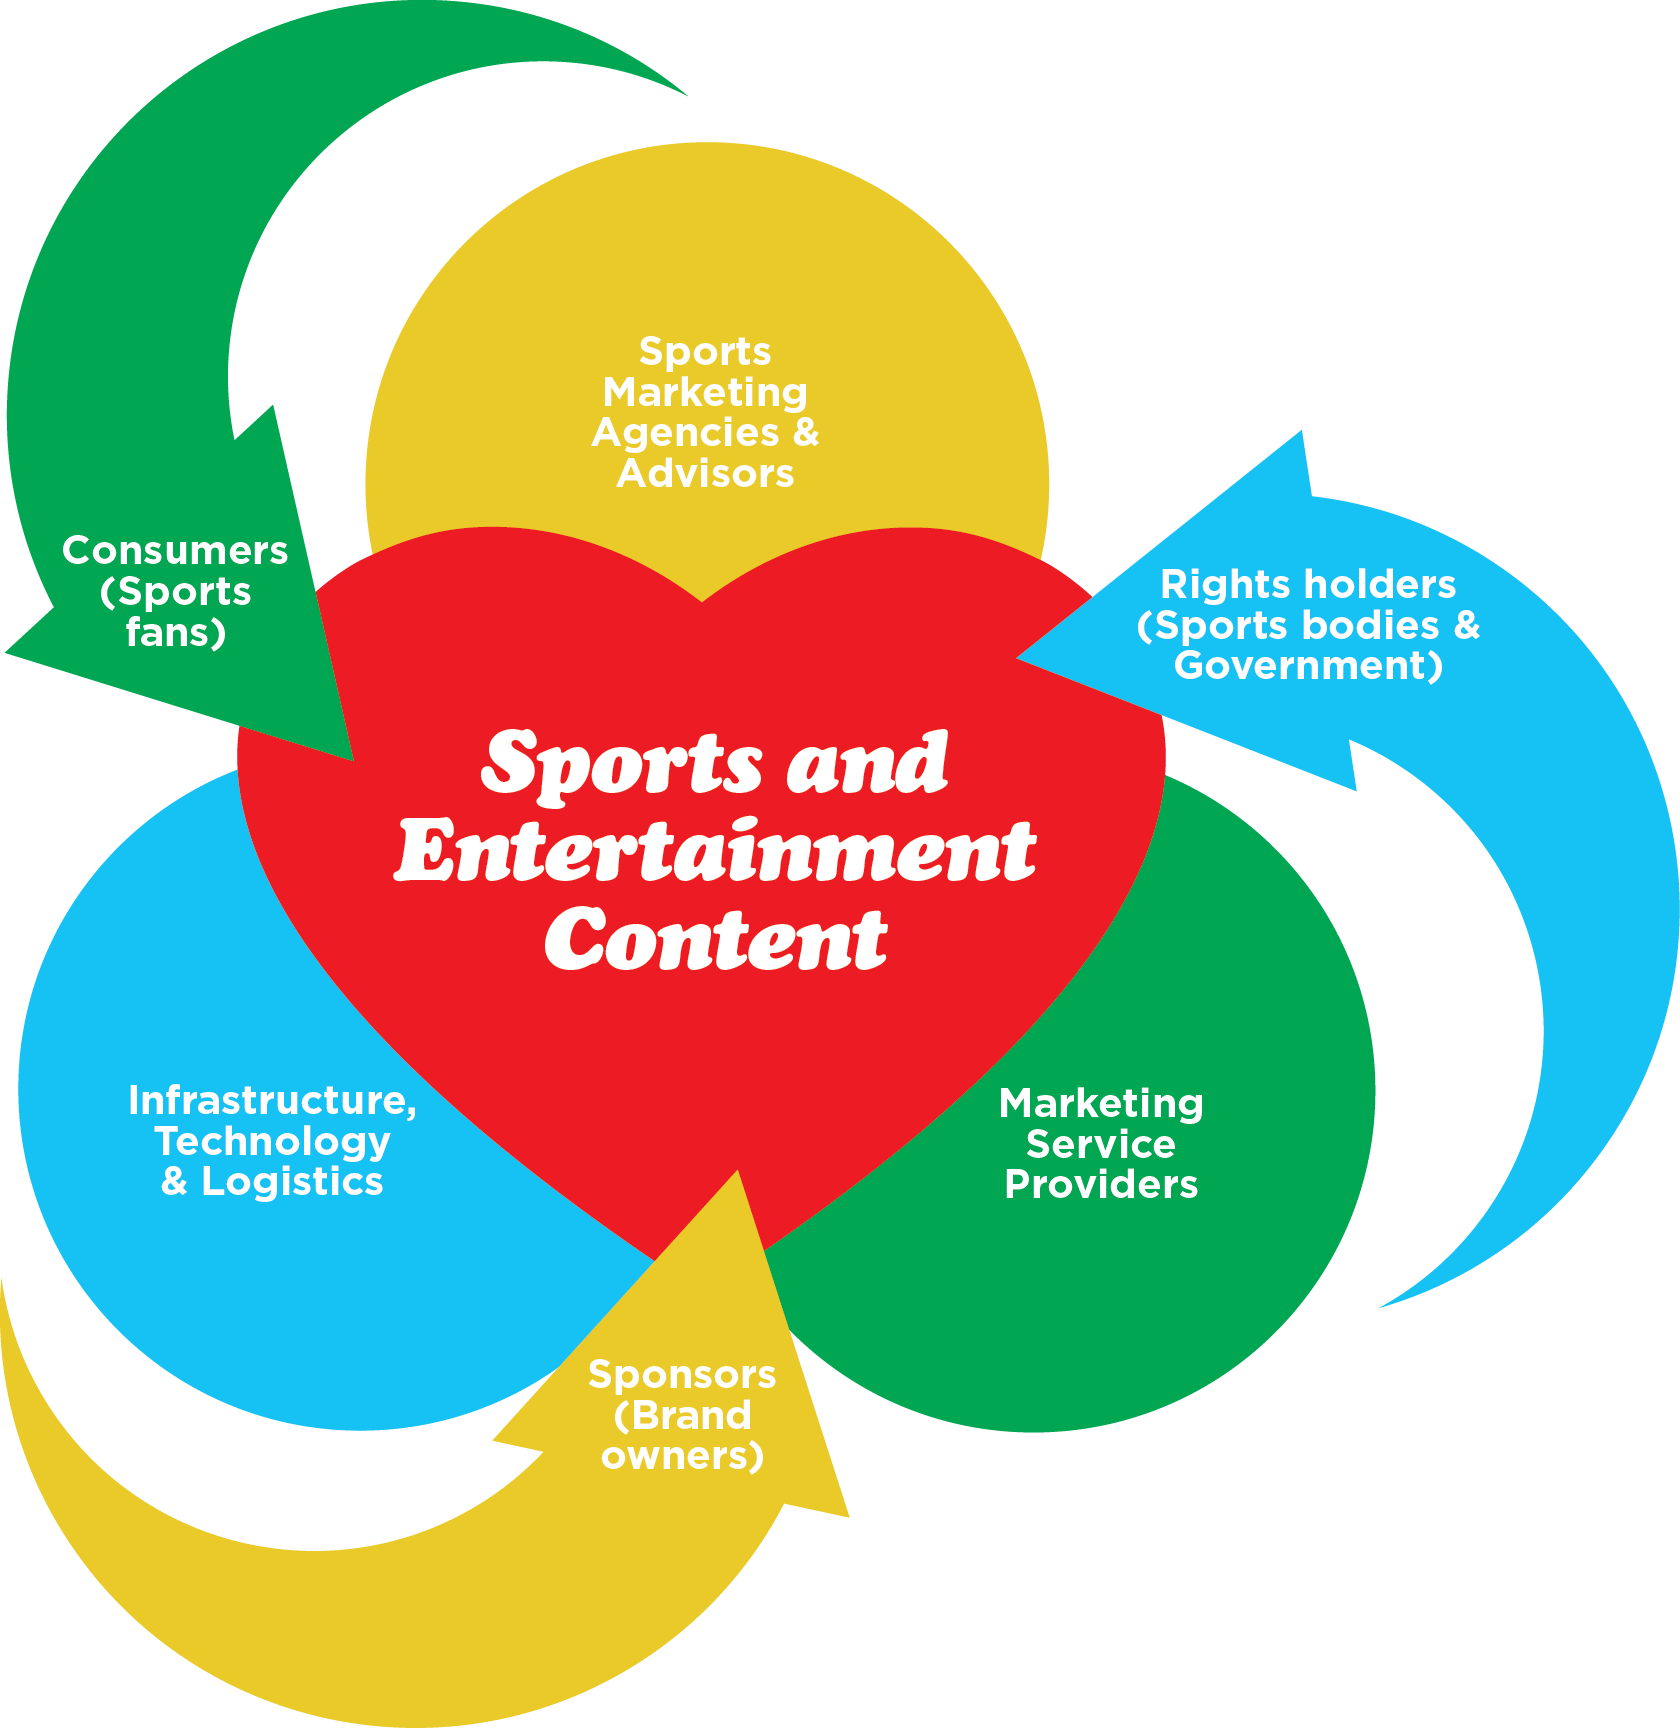 UK sports marketing and consultancy services eco-system